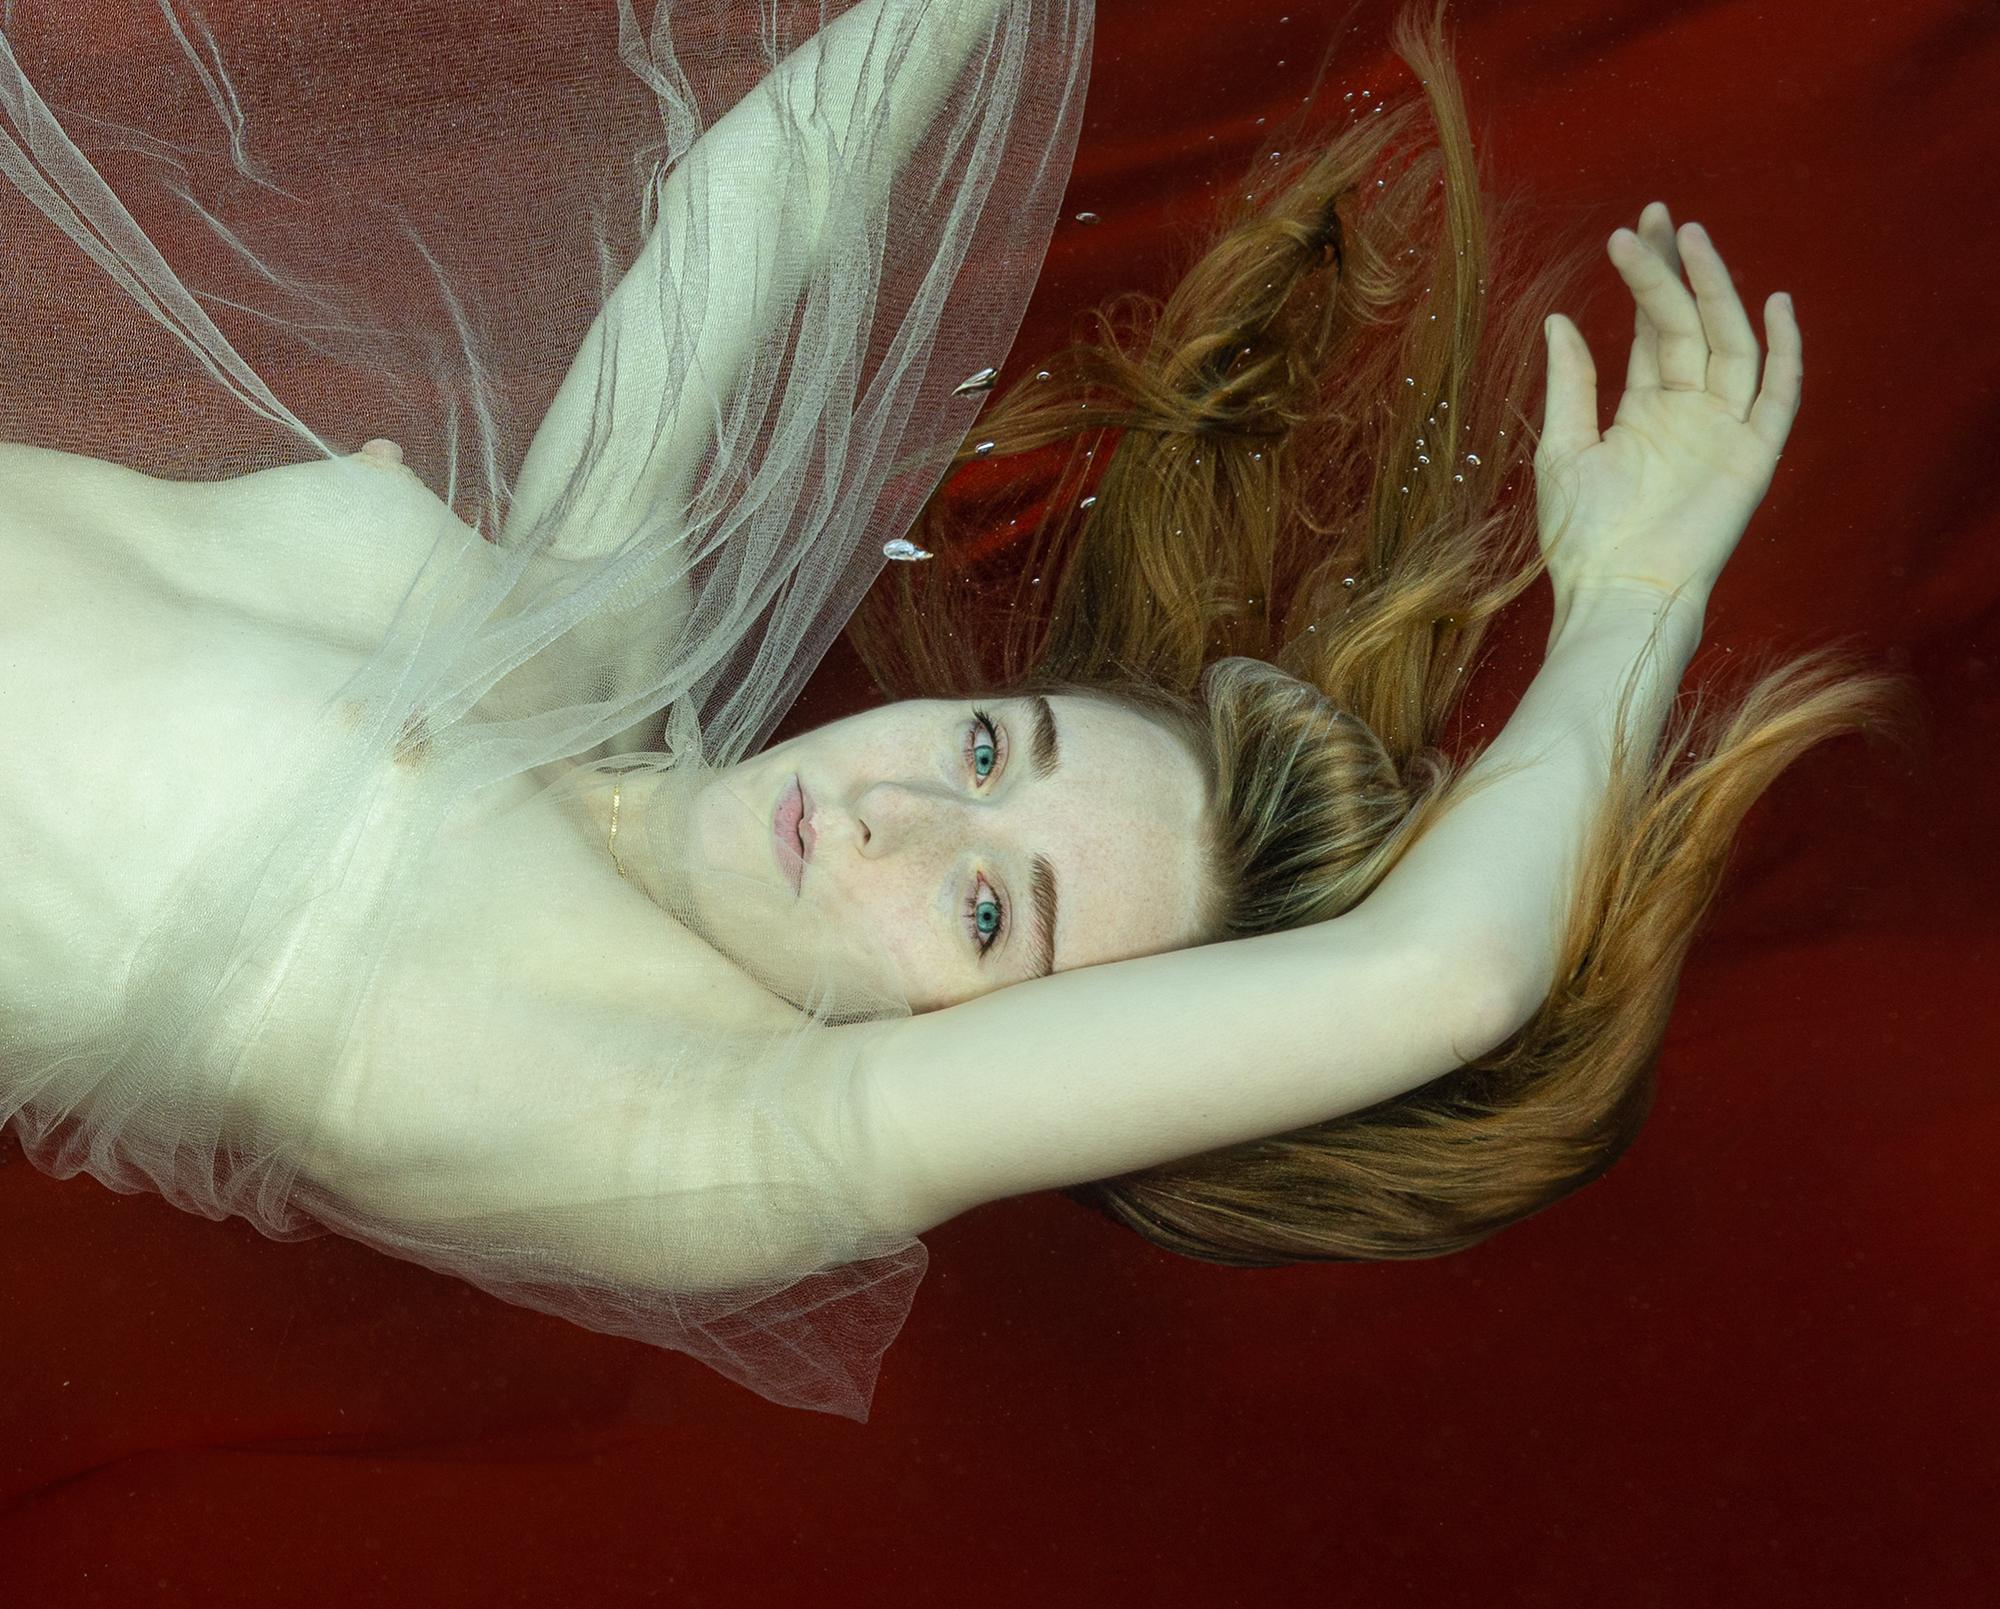 Die Loreley - underwater nude photograph - archival pigment print - Photograph by Alex Sher